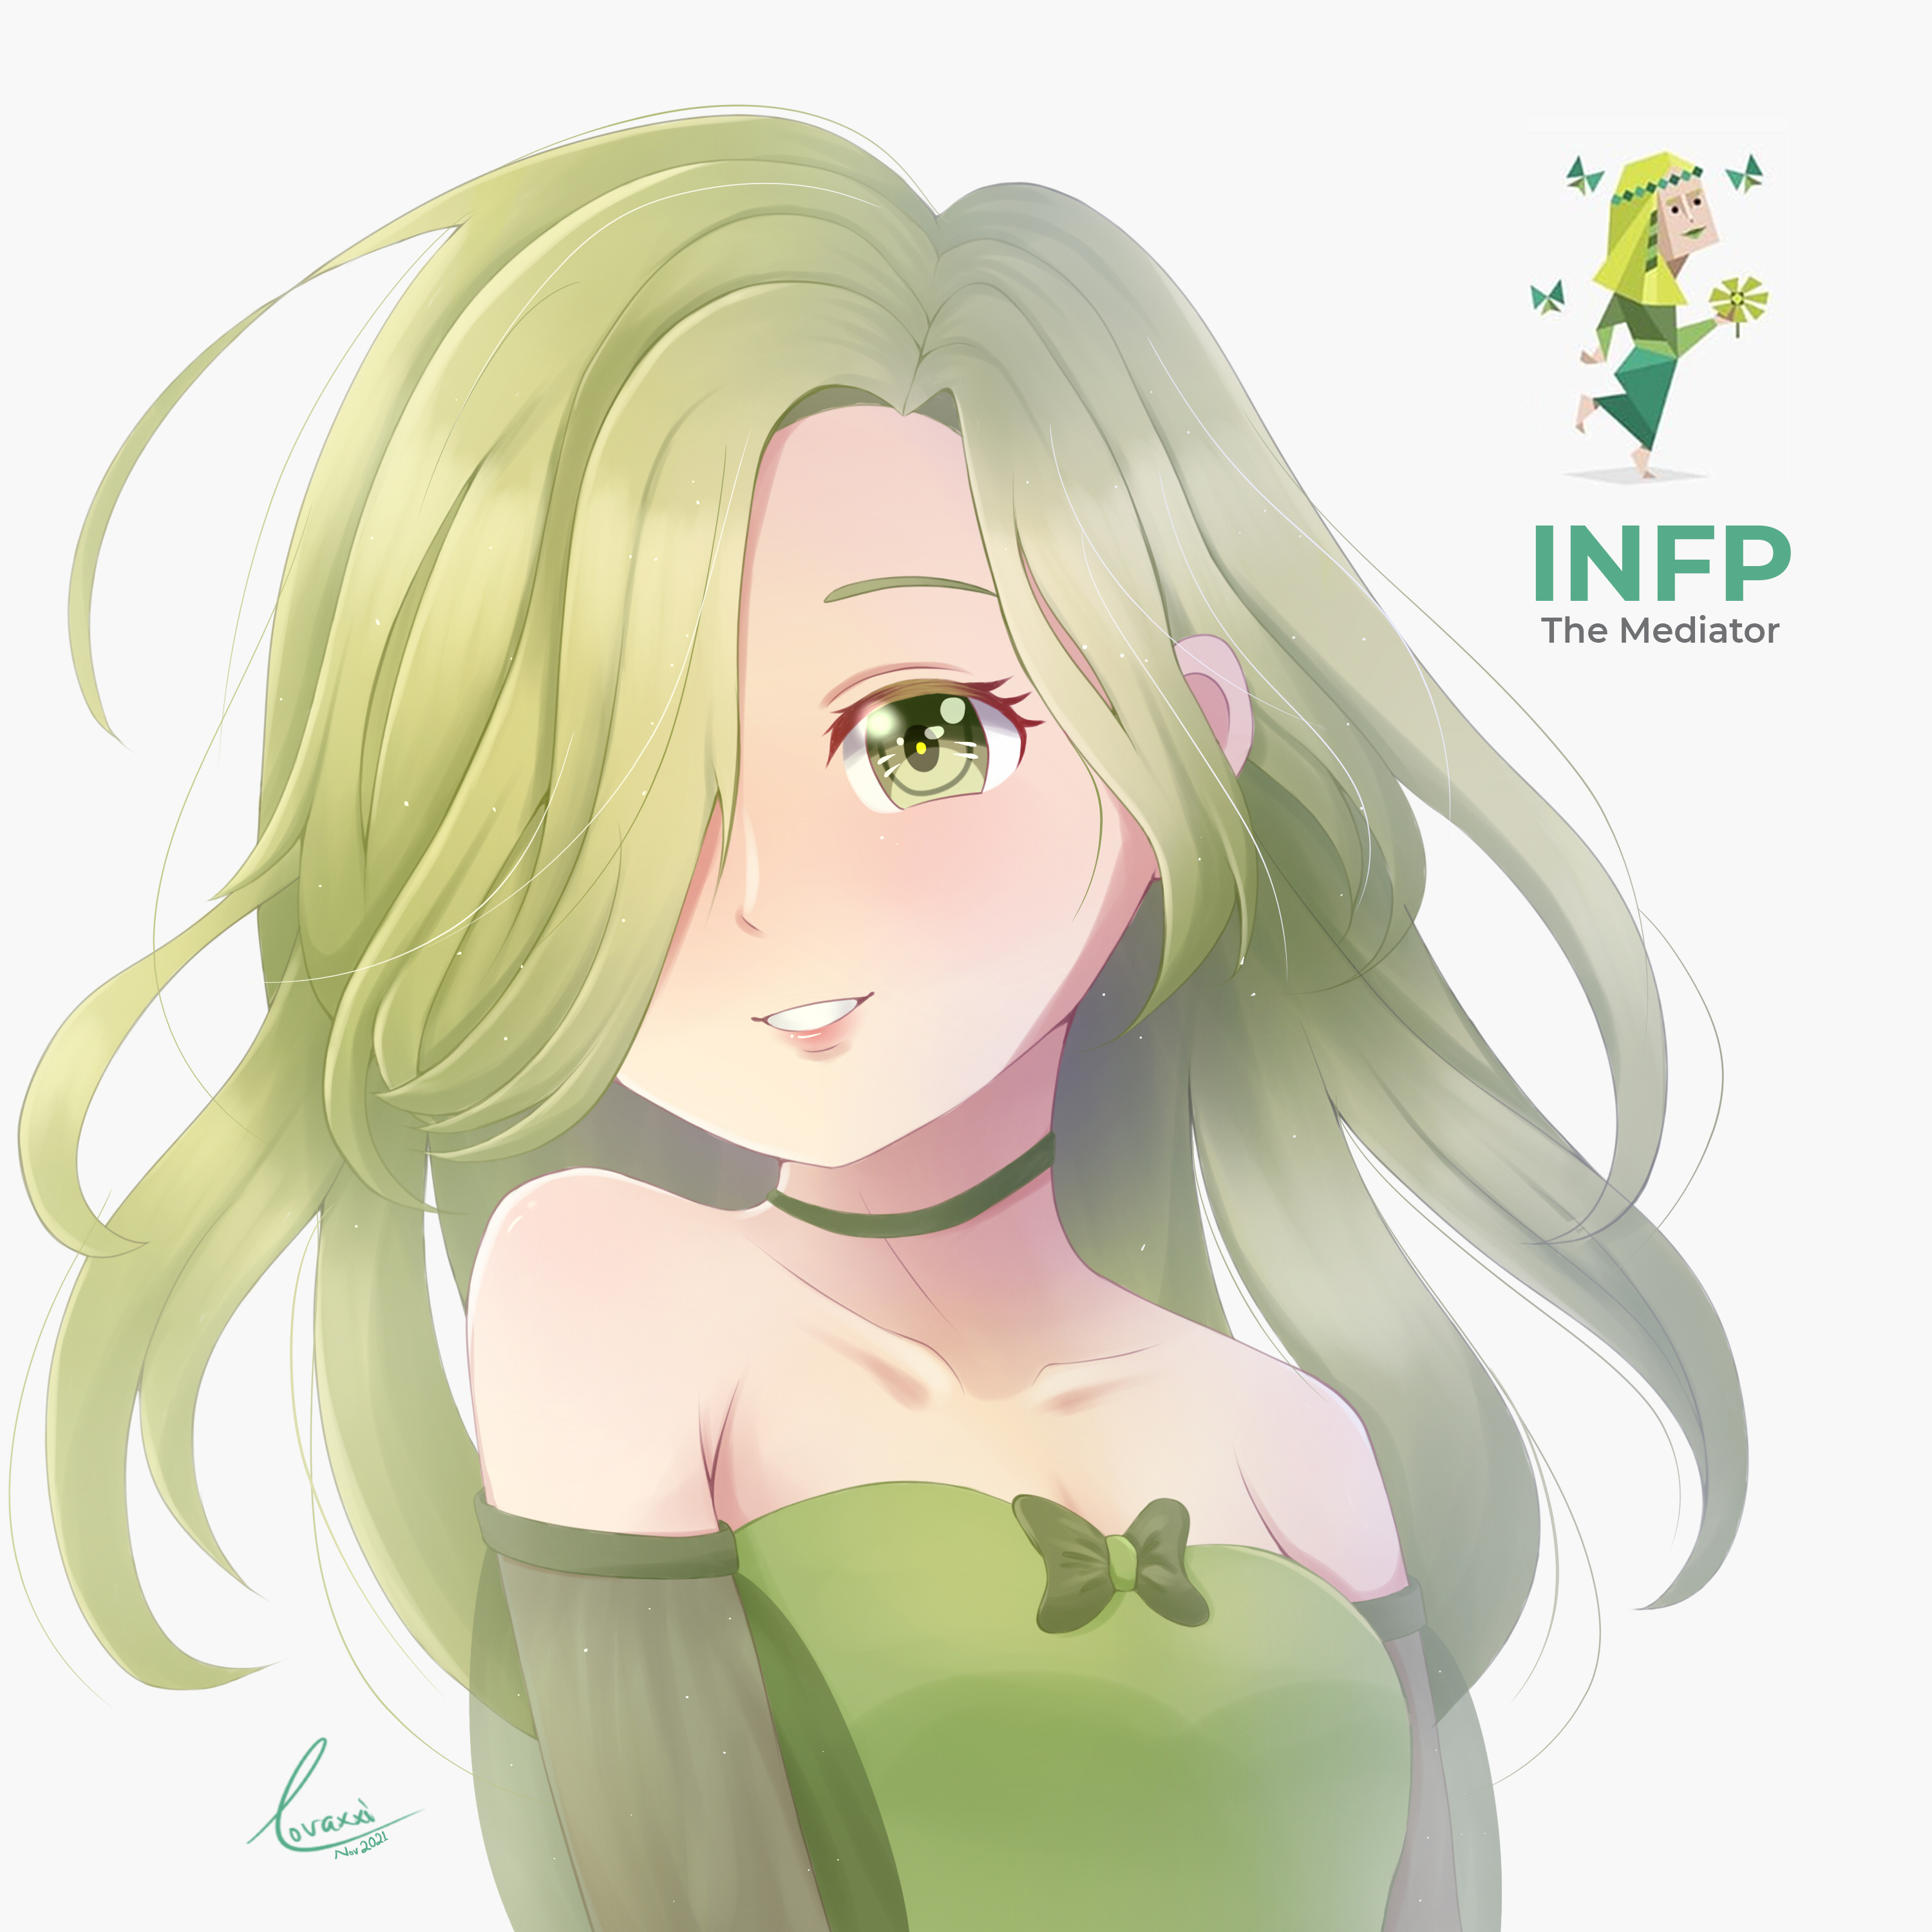 infp anime characters by ICatfishedYourGramma on DeviantArt